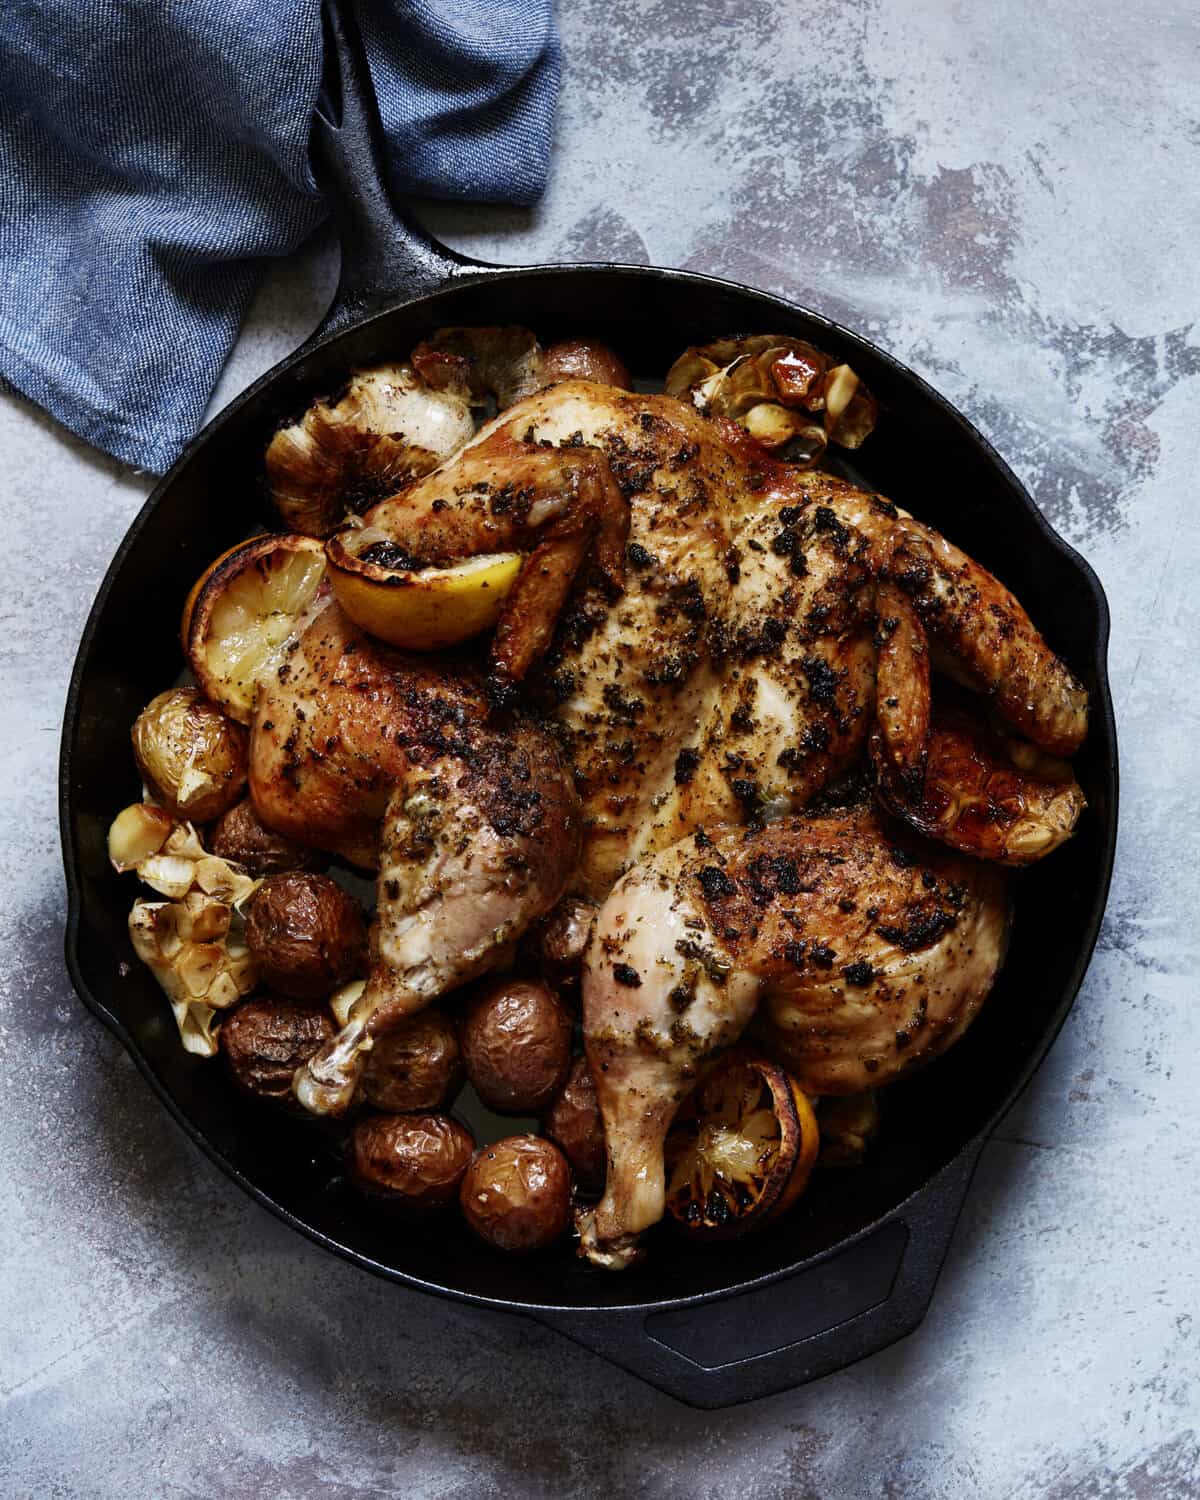 A cast iron skillet placed on a blue kitchen towel with a spatchcocked roasted chicken in it, sitting on a bed of lemon halves and baby potatoes.